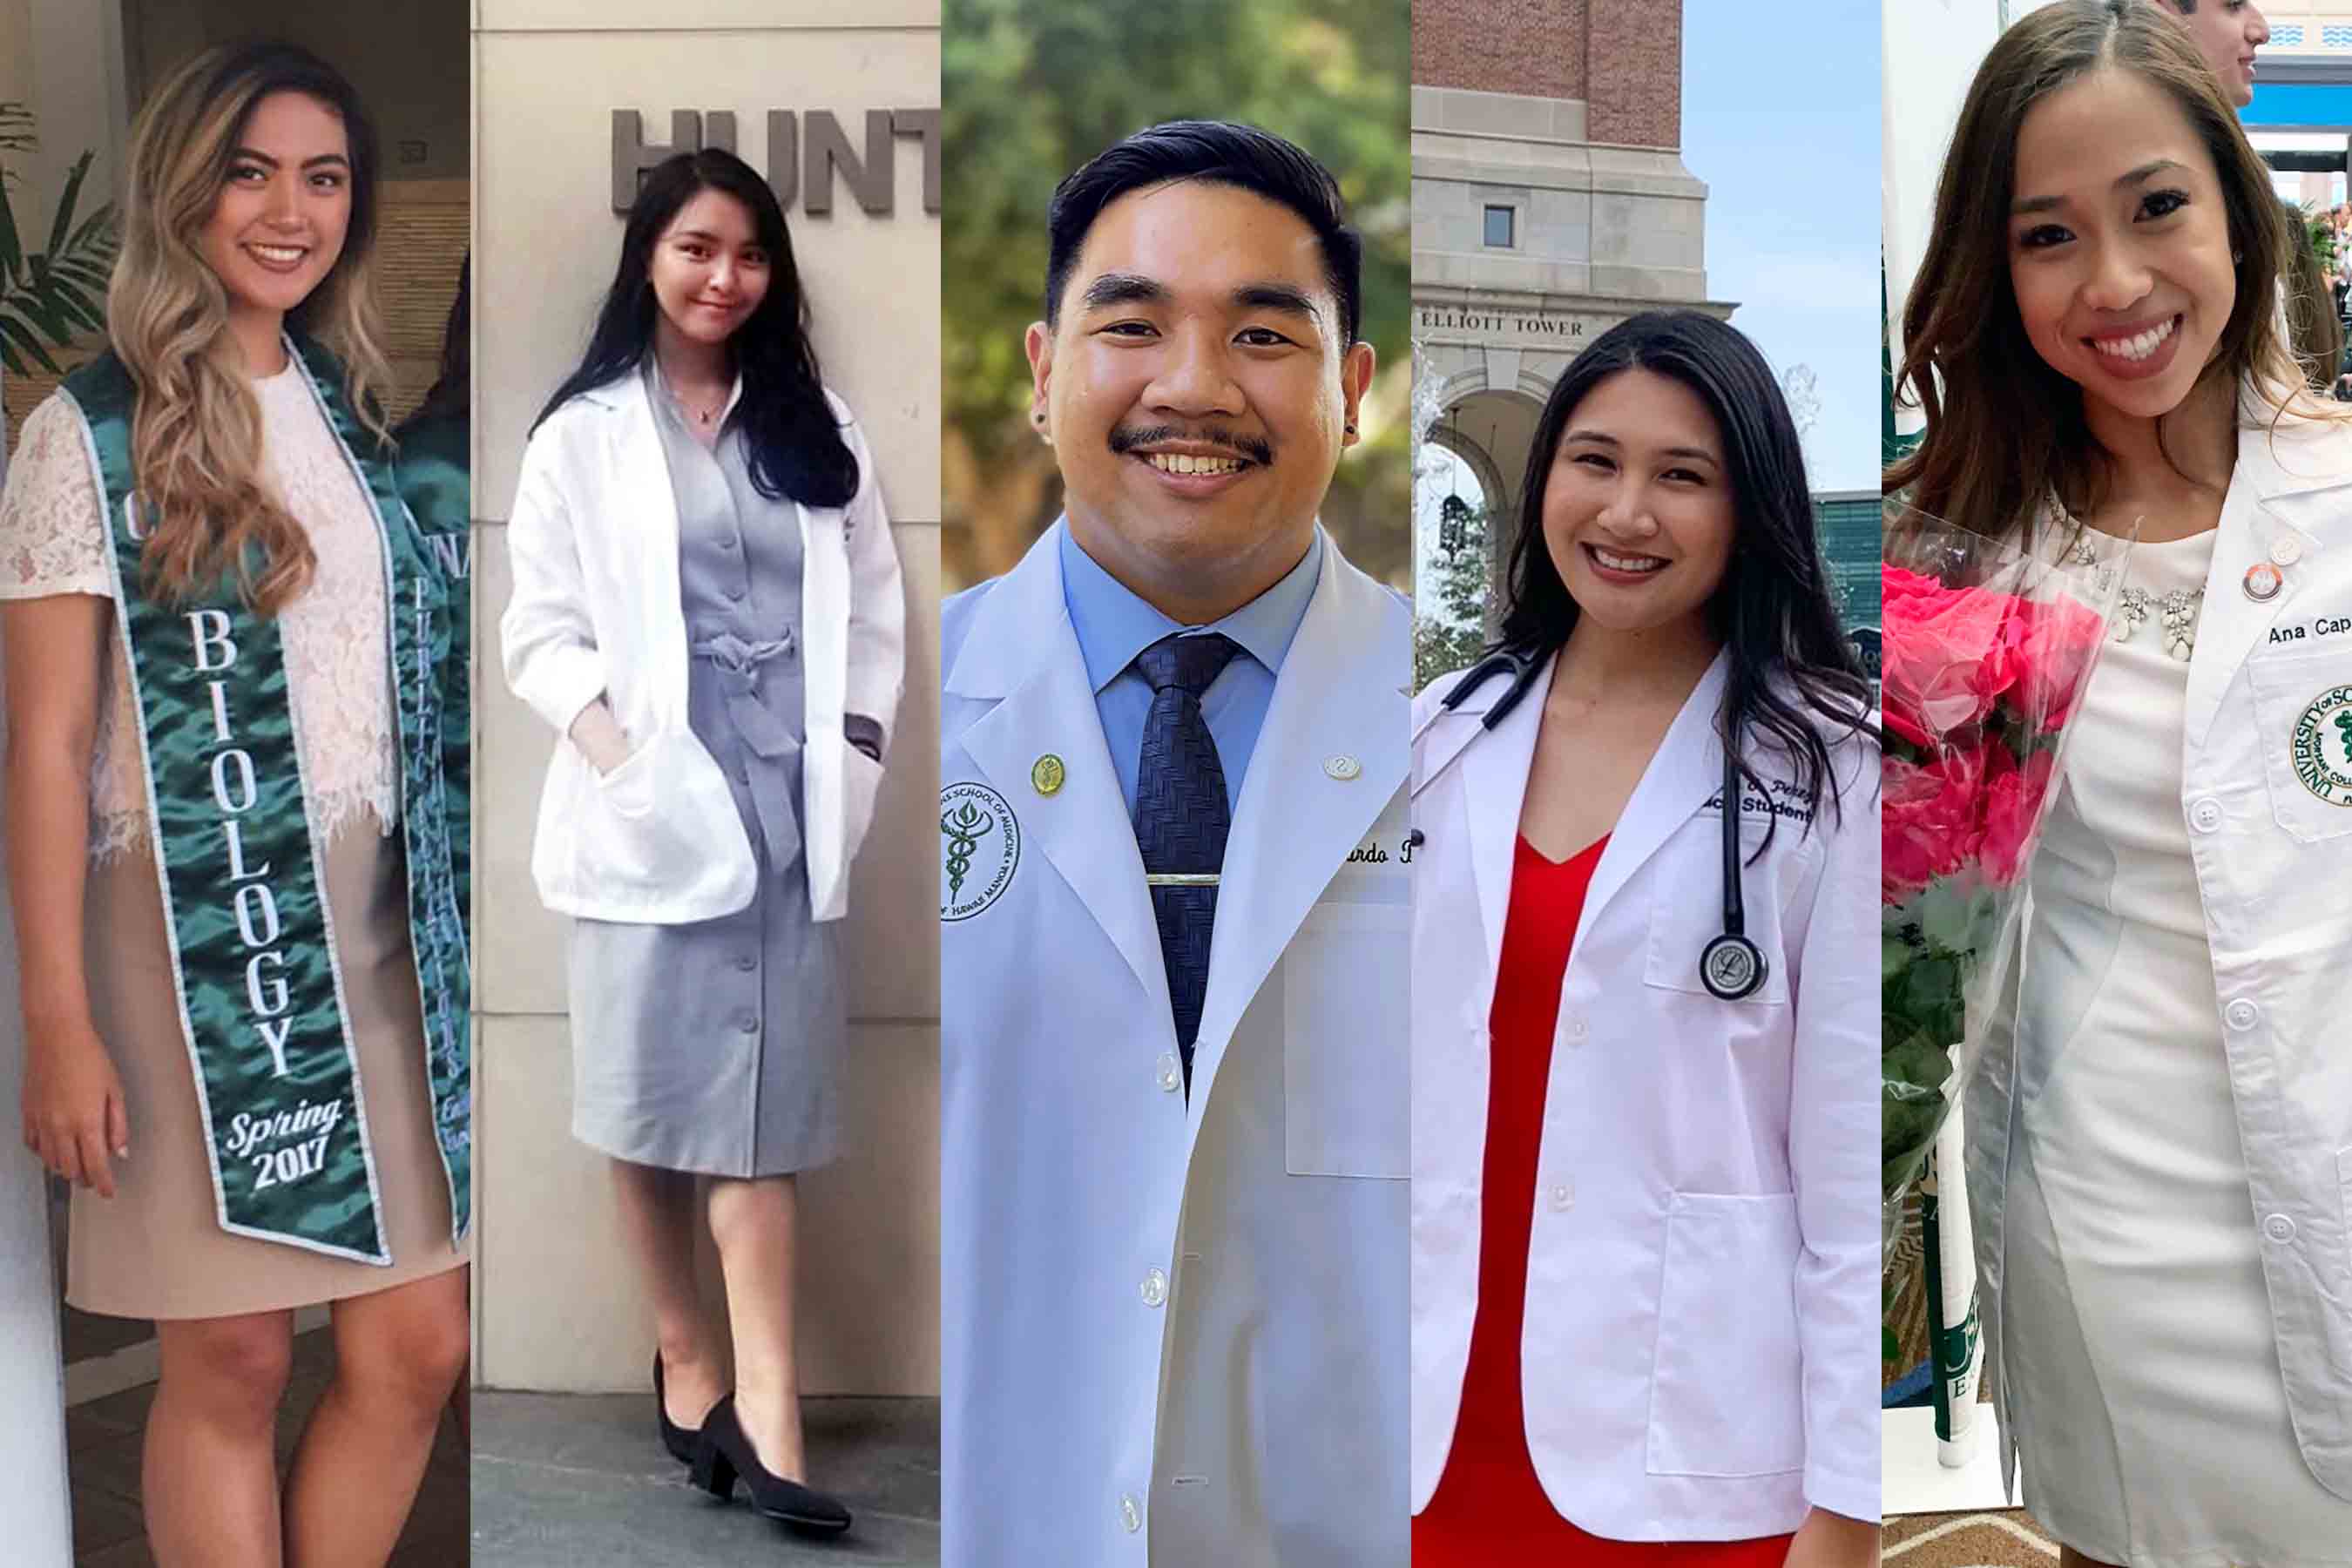 With five grads in med school, UOG's Class of 2017 may be leading a trend.